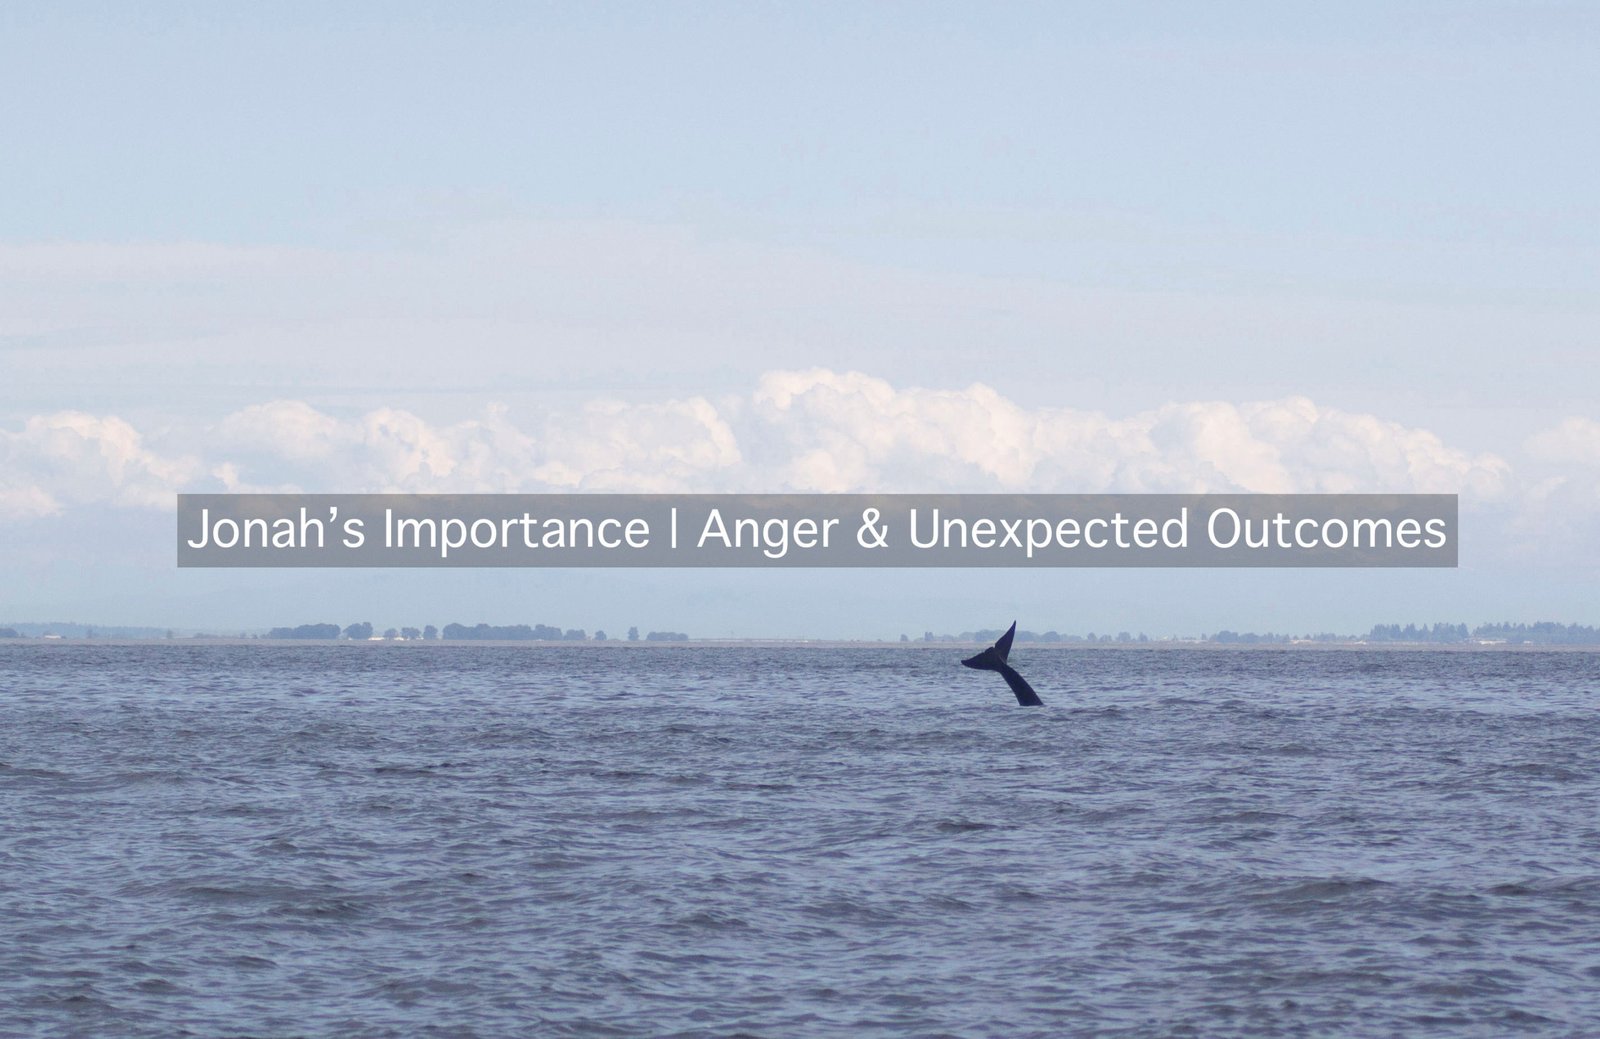 Jonah's Importance : anger and unexpected outcomes